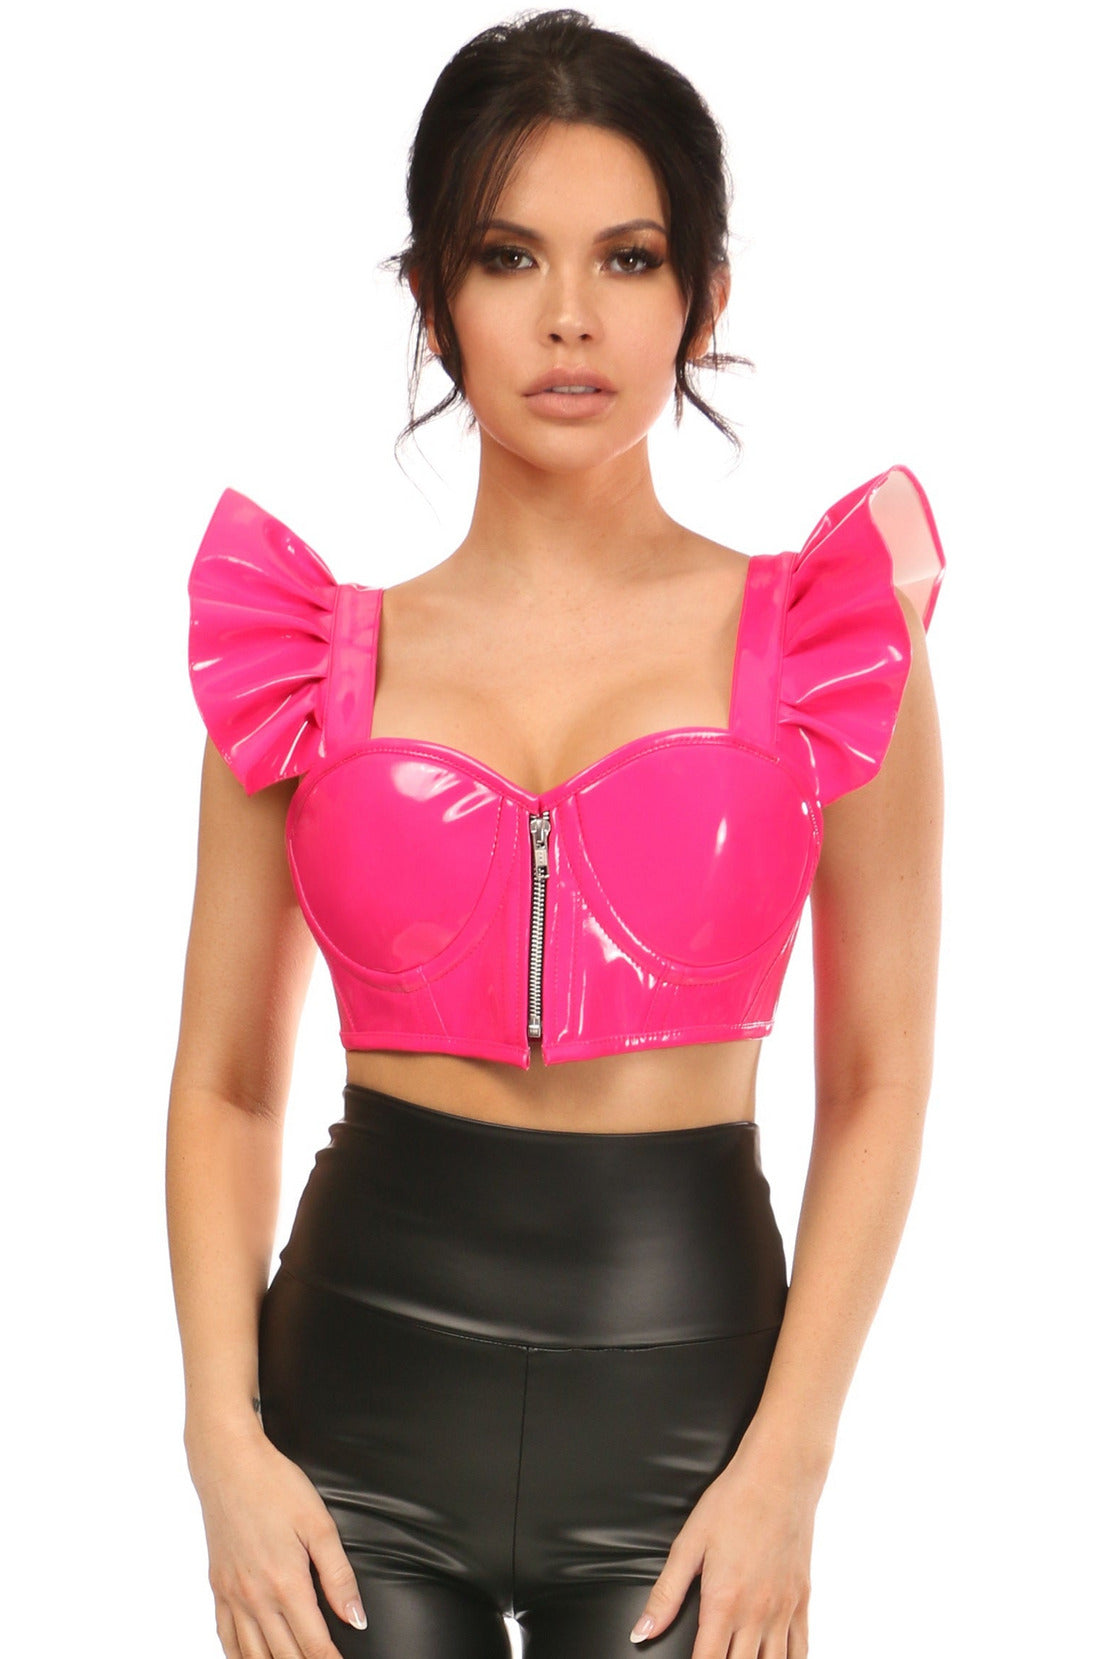 Daisy Corsets Lavish Hot Pink Patent Underwire Bustier Top w